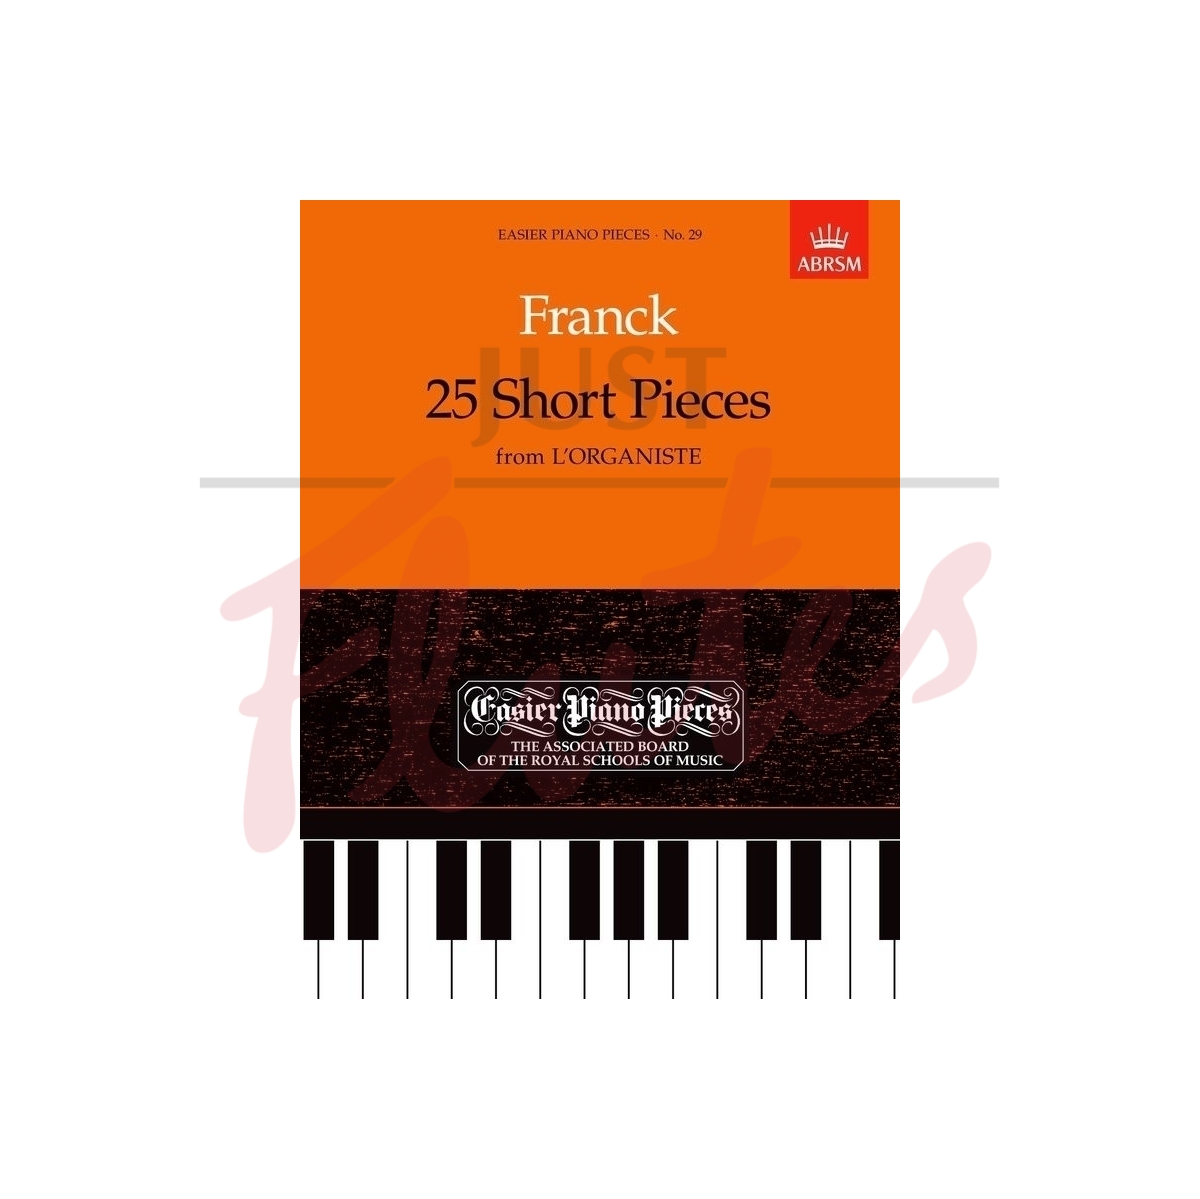 25 Short Pieces from L'Organiste